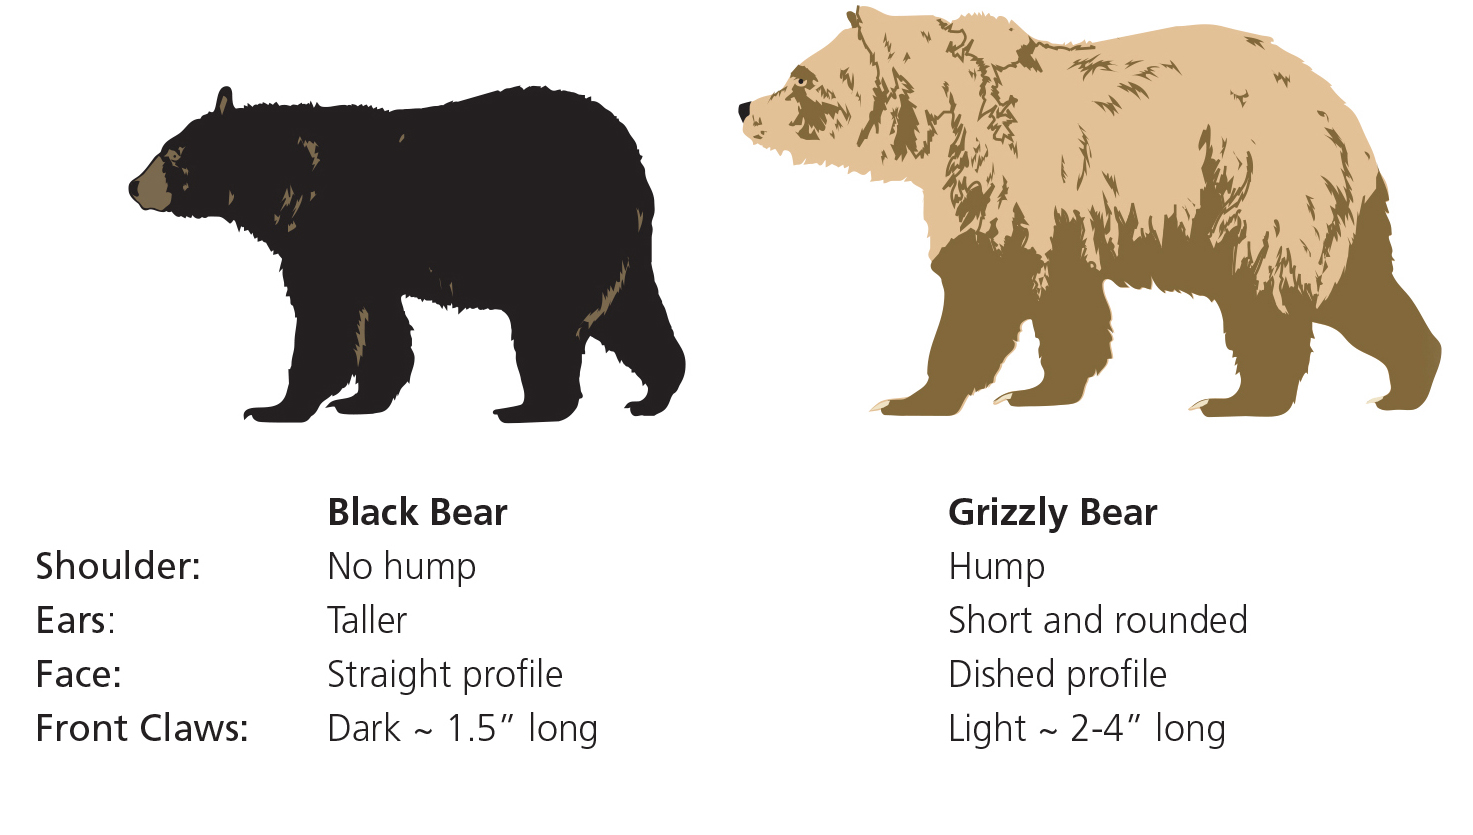 U.S. Considers Lifting Protections for Grizzly Bears Near Two National  Parks - The New York Times